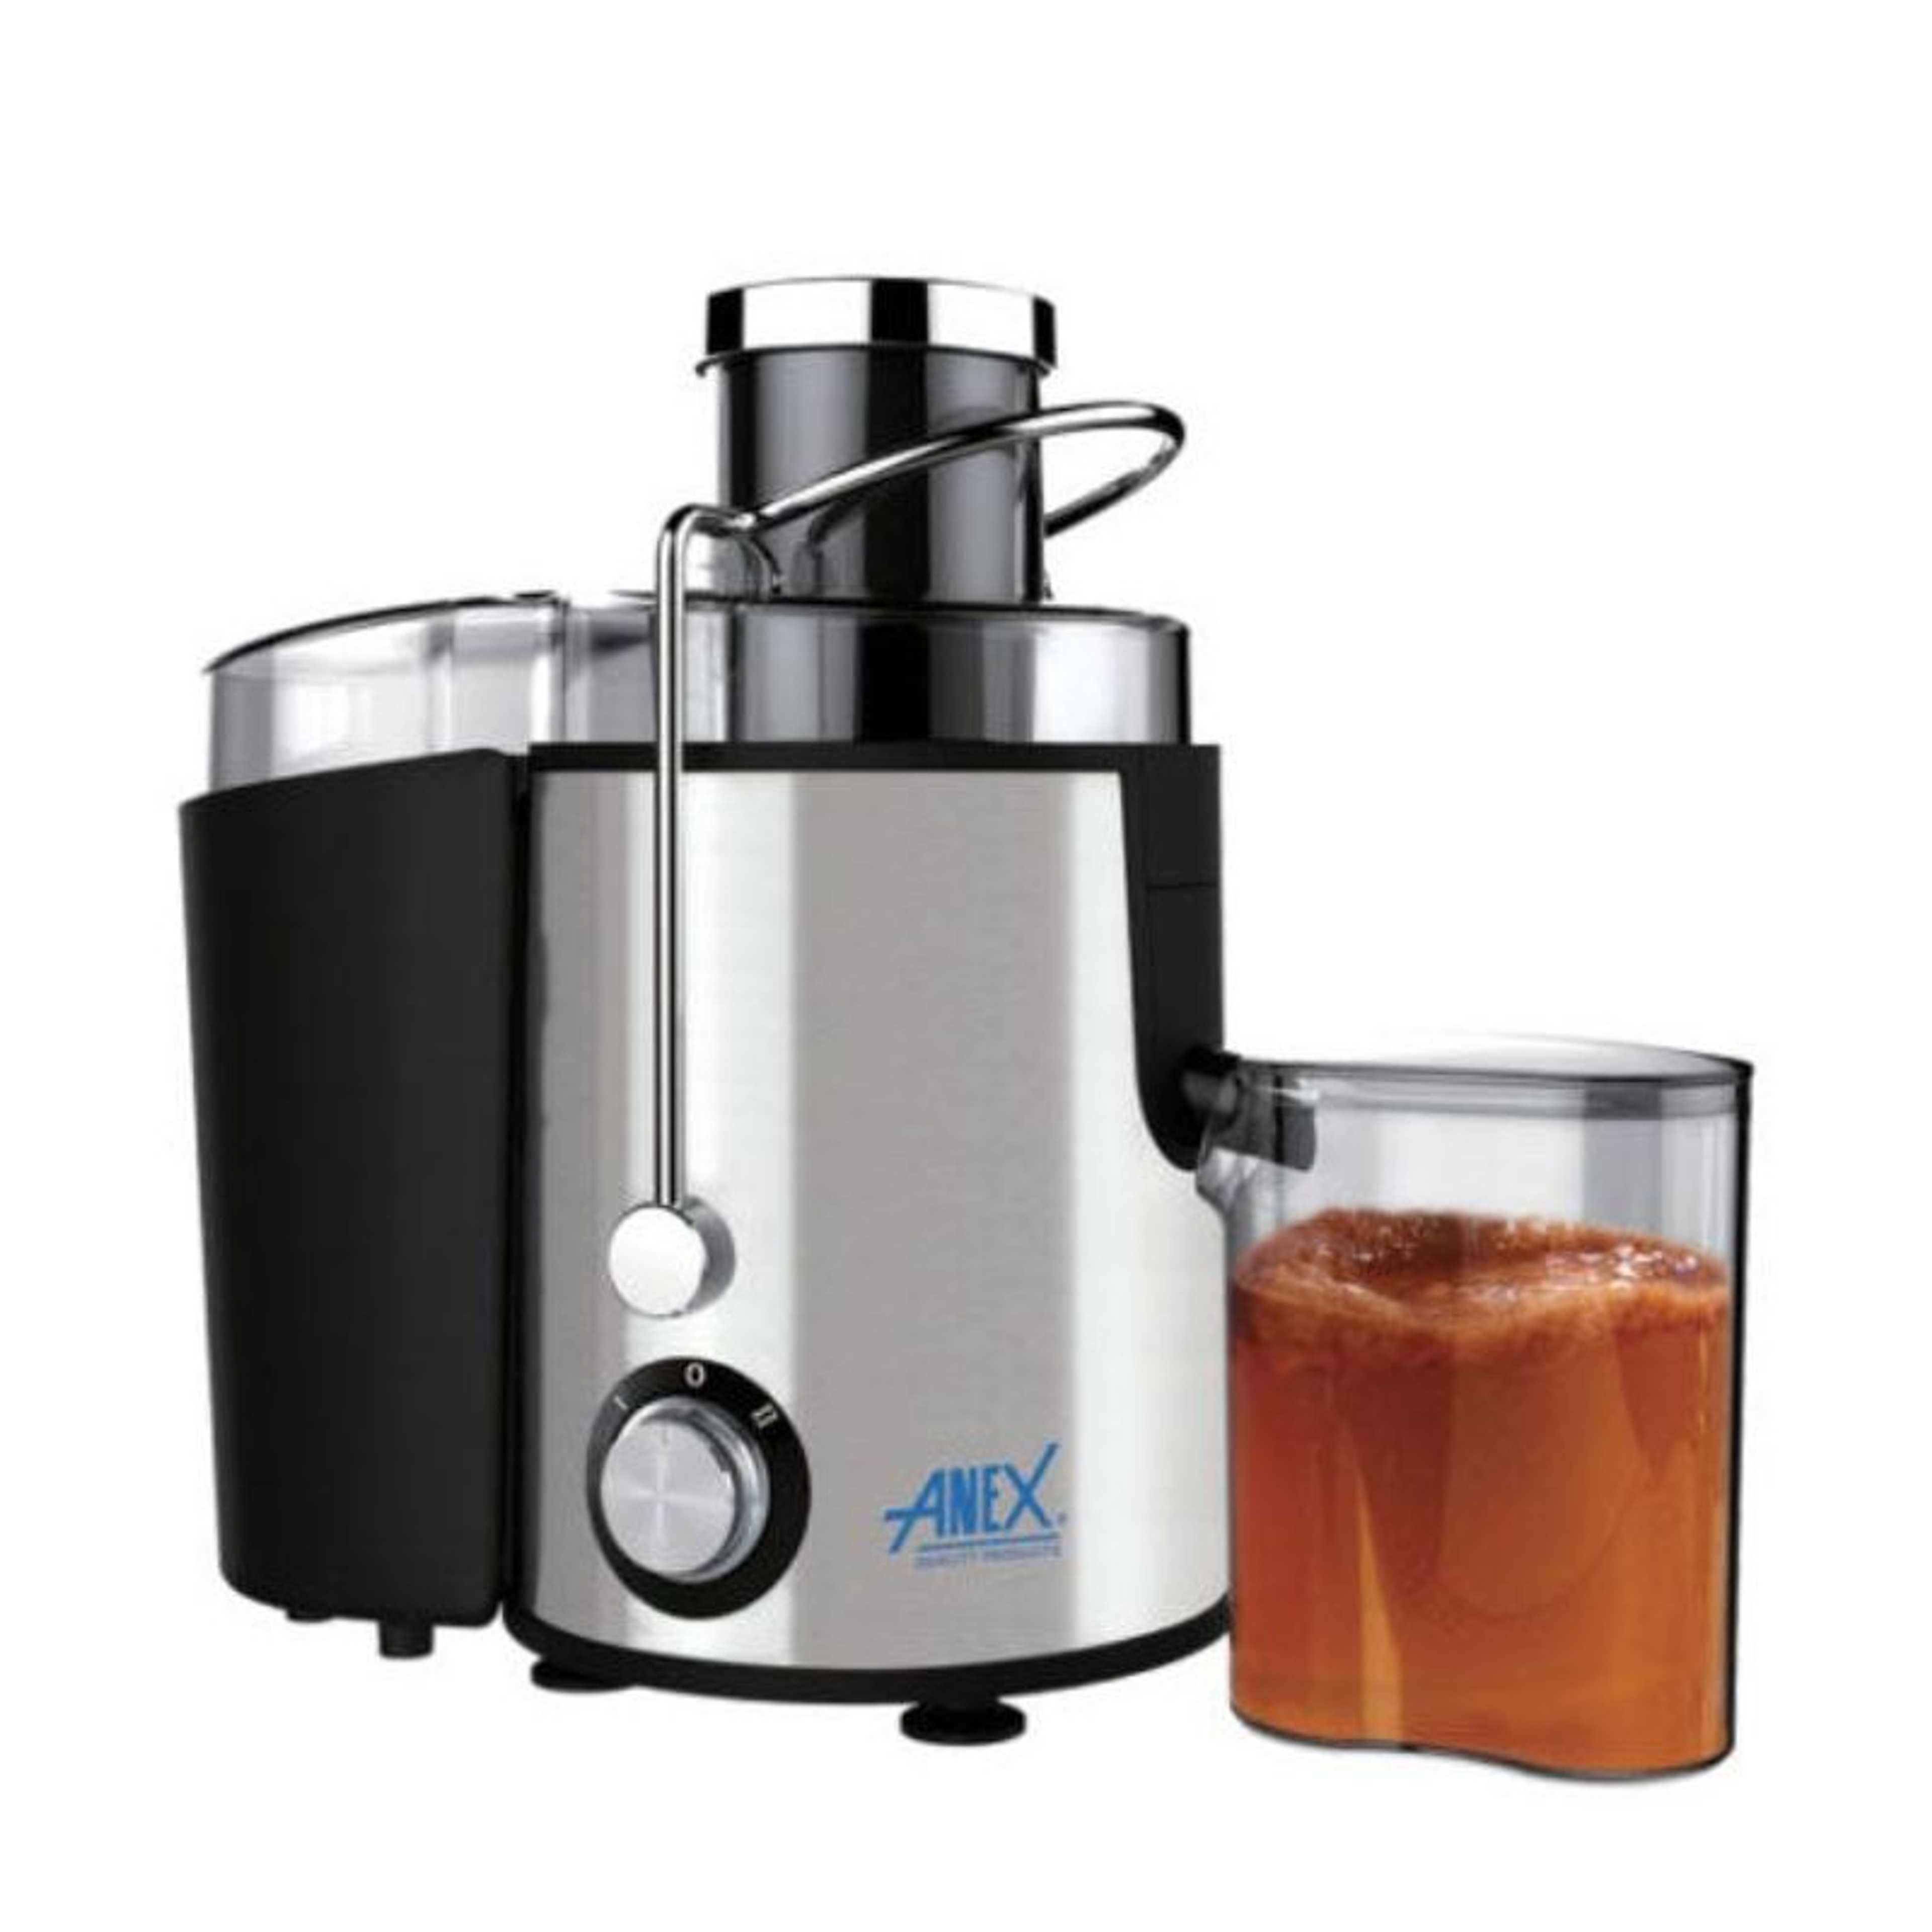 AG-70 Deluxe Juicer | Kitchen Appliance